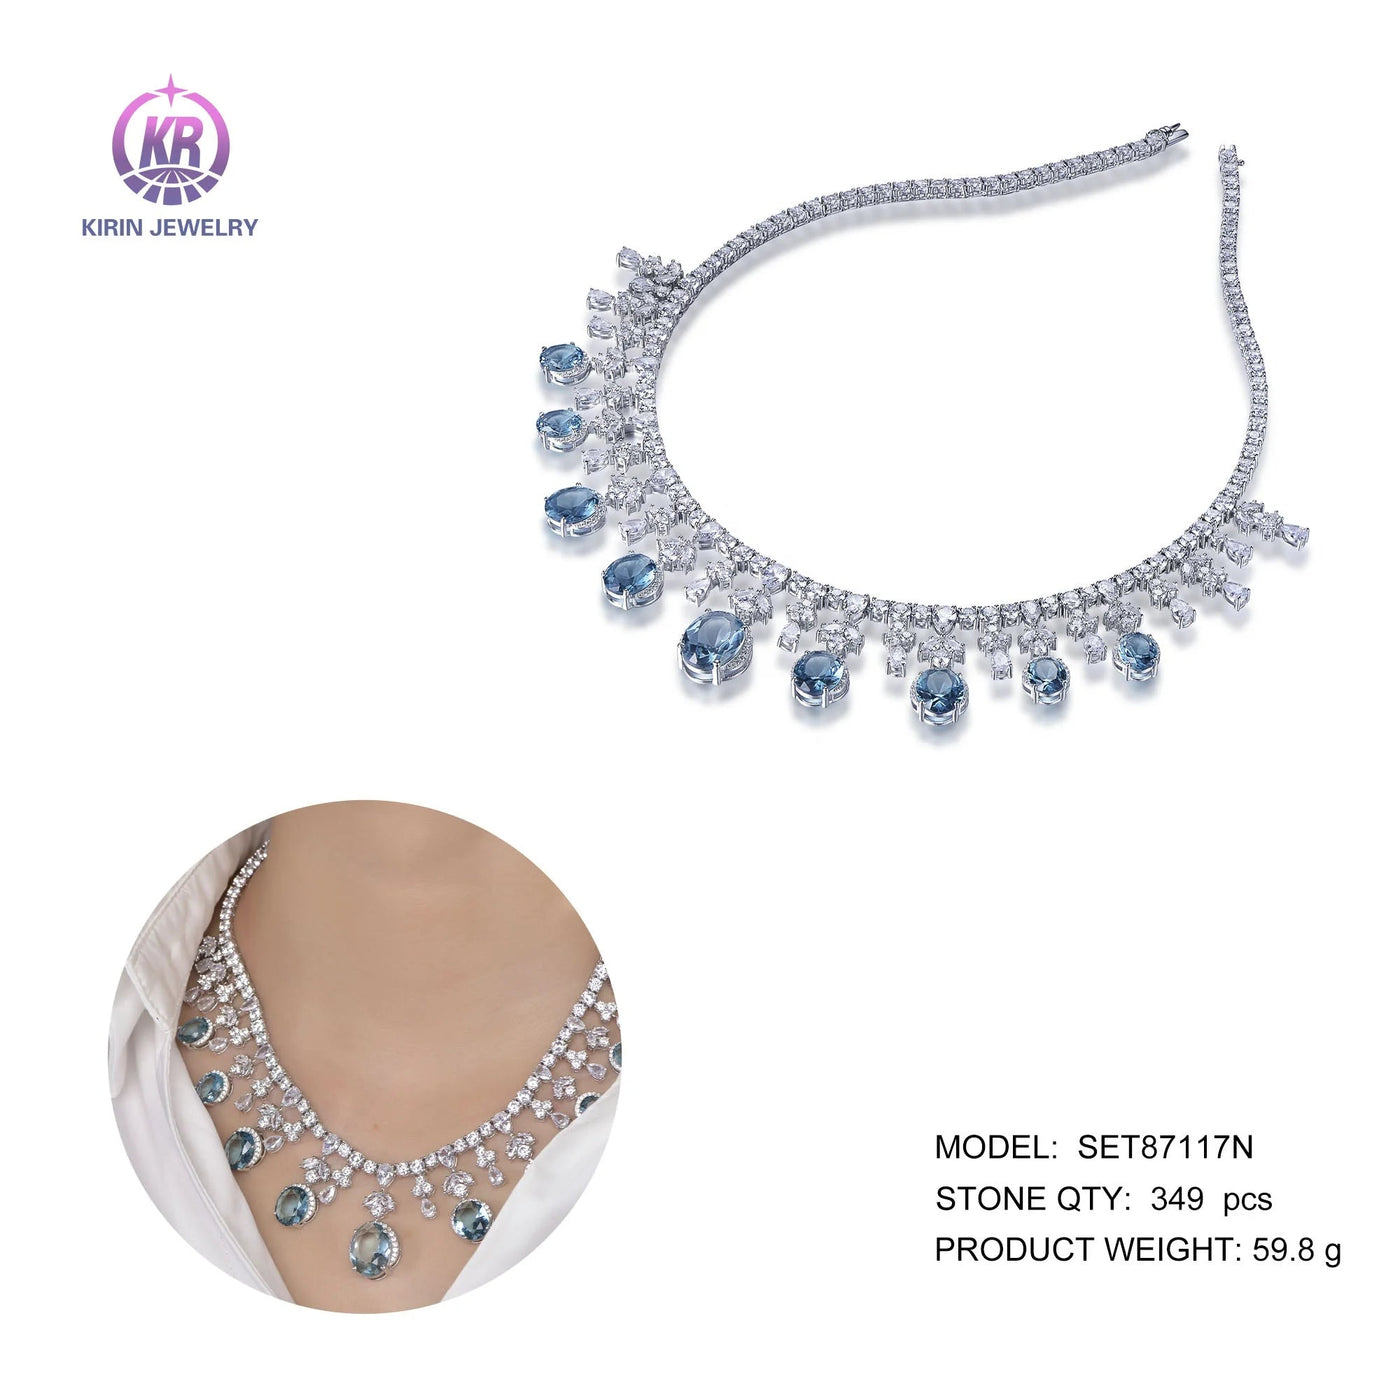 Fine Jewelry Necklaces 5A Cubic Zirconia Classic Tennis Necklace Moissanite Aquamarine Crystal Necklace Kirin Jewelry